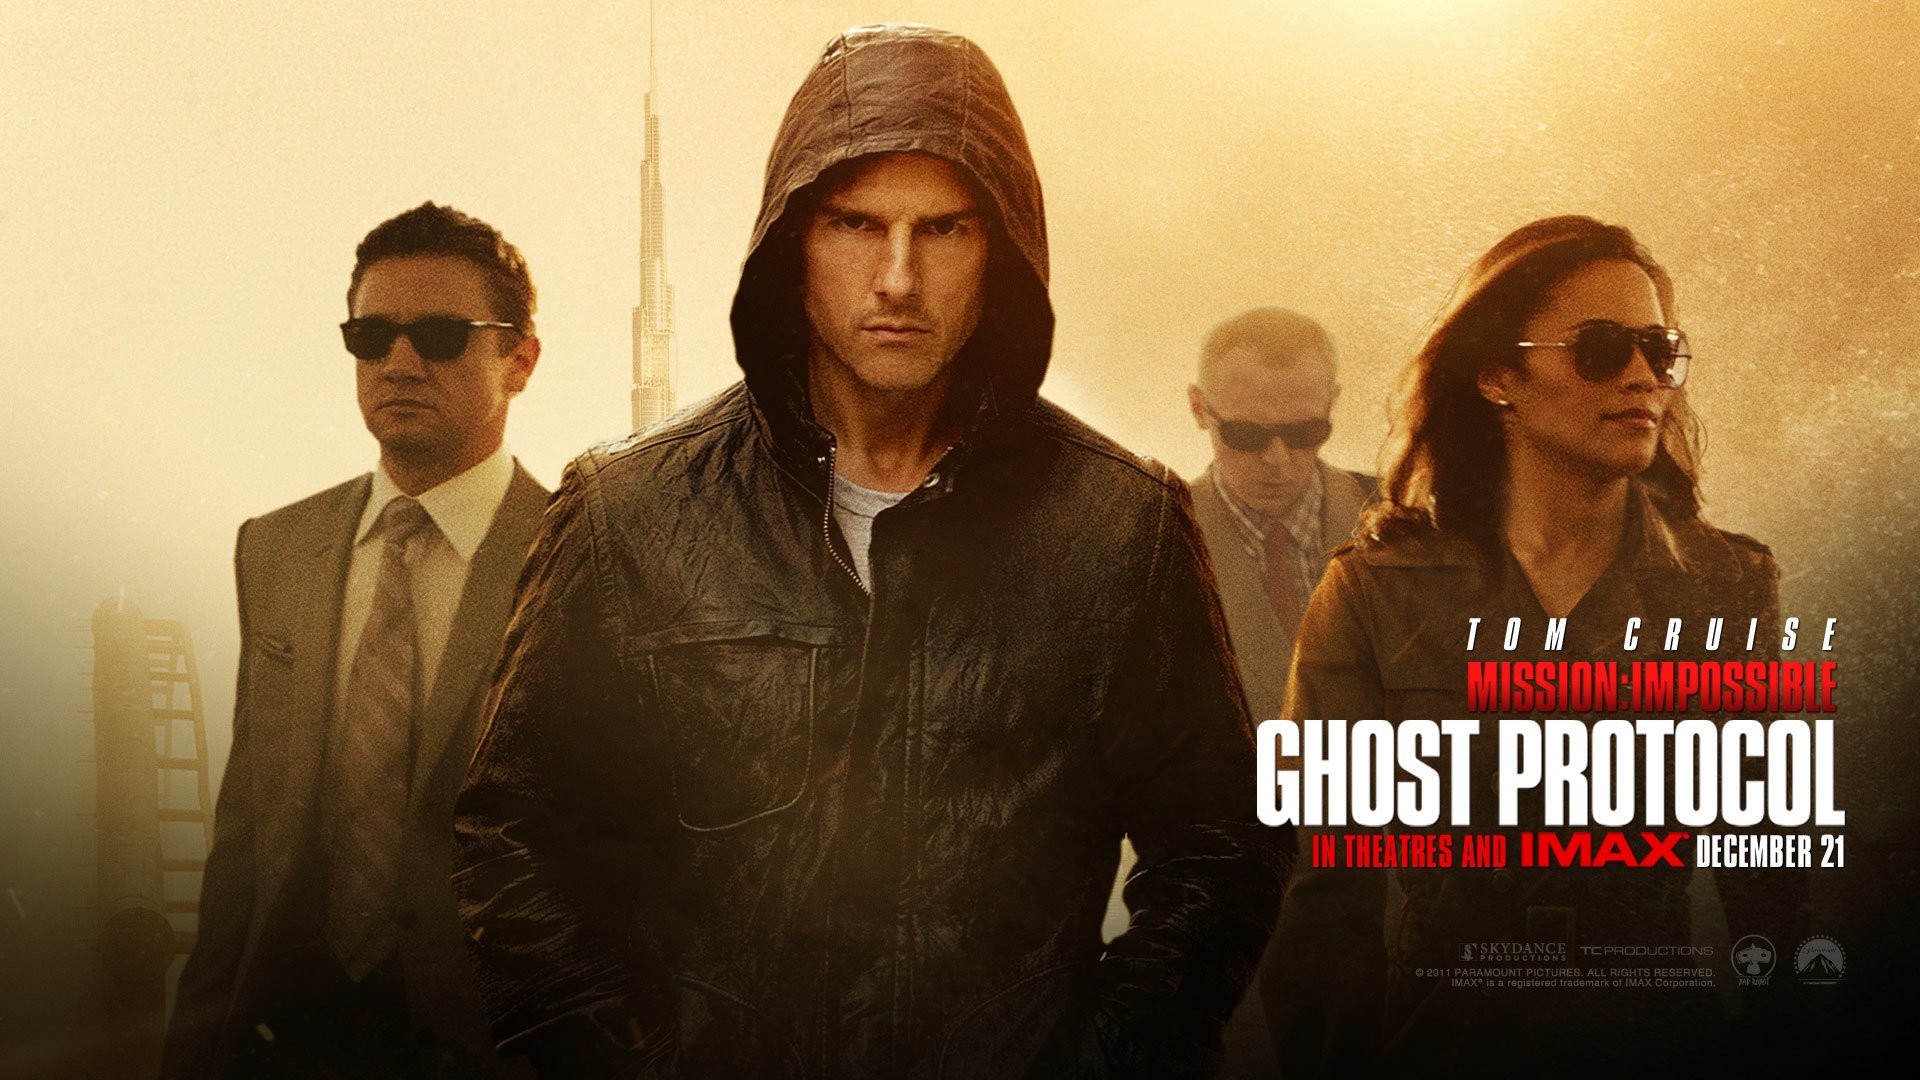 mission impossible ghost protocol in hindi hd download